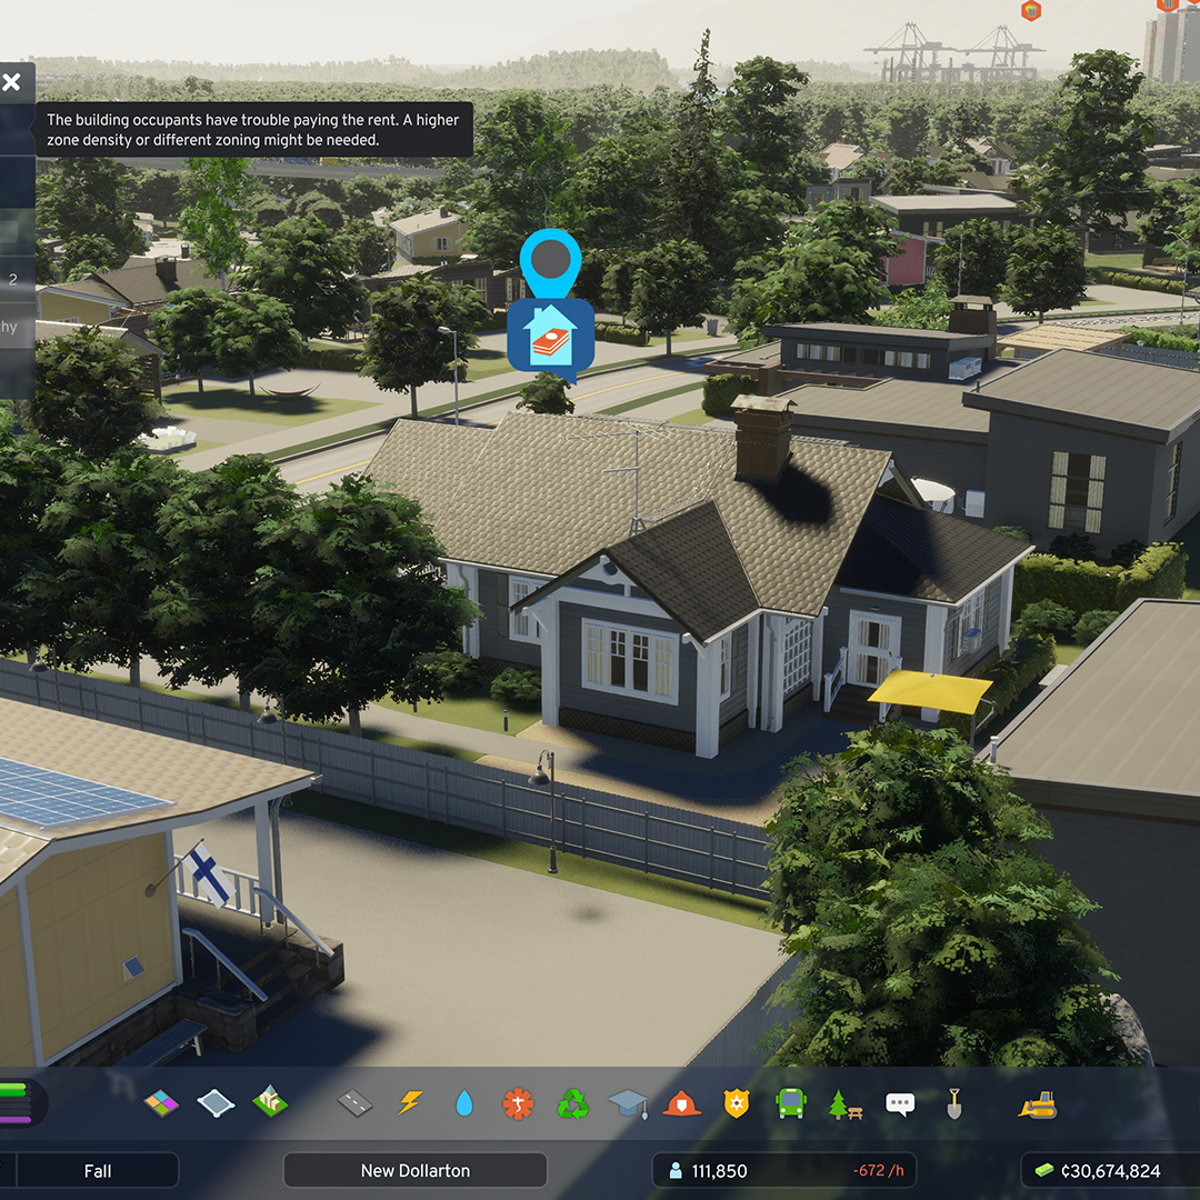 Cities: Skylines Review: An Addictive City-Builder